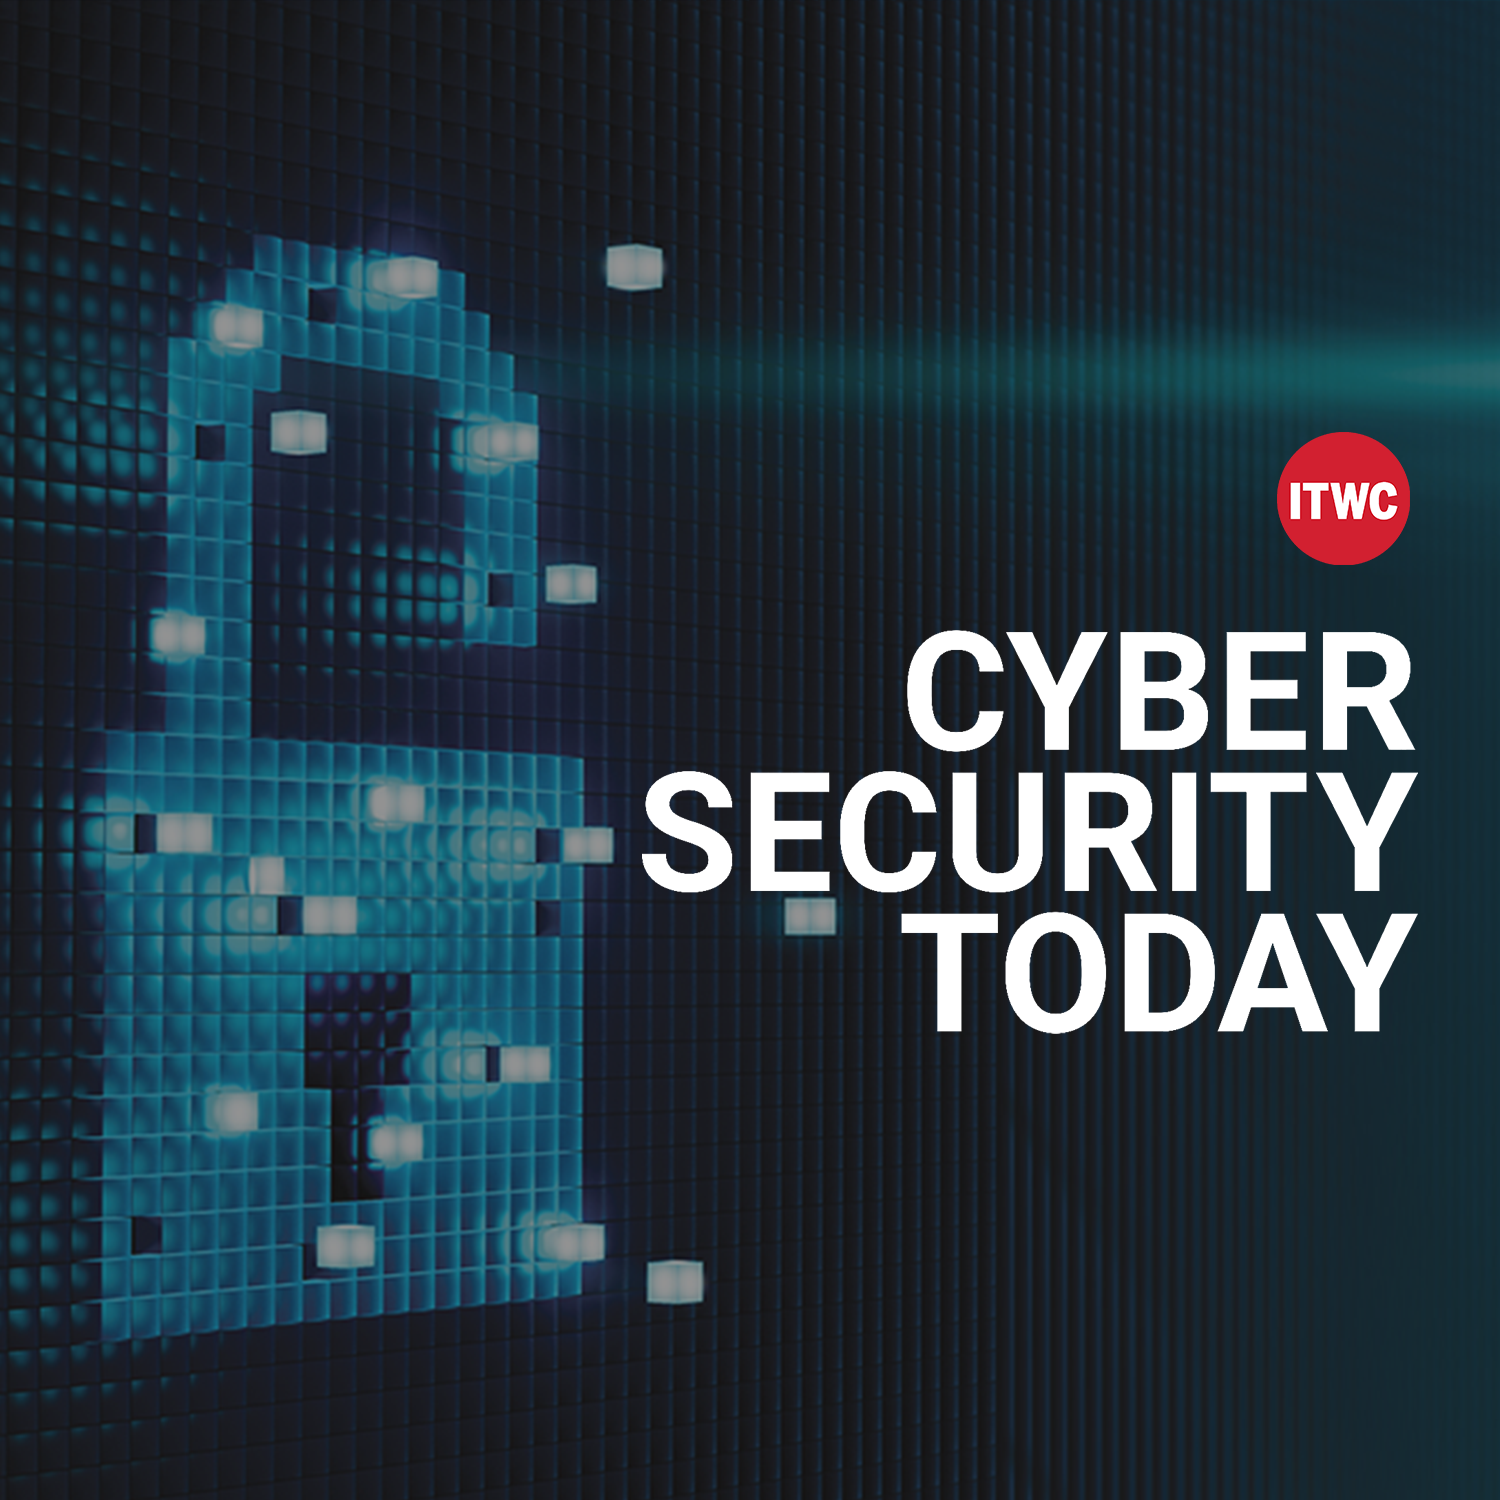 Cyber Security Today, July 26, 2021 – Beware of fake Windows 11 downloads, how an insurance giant was hacked, a ransomware gang attacked and more